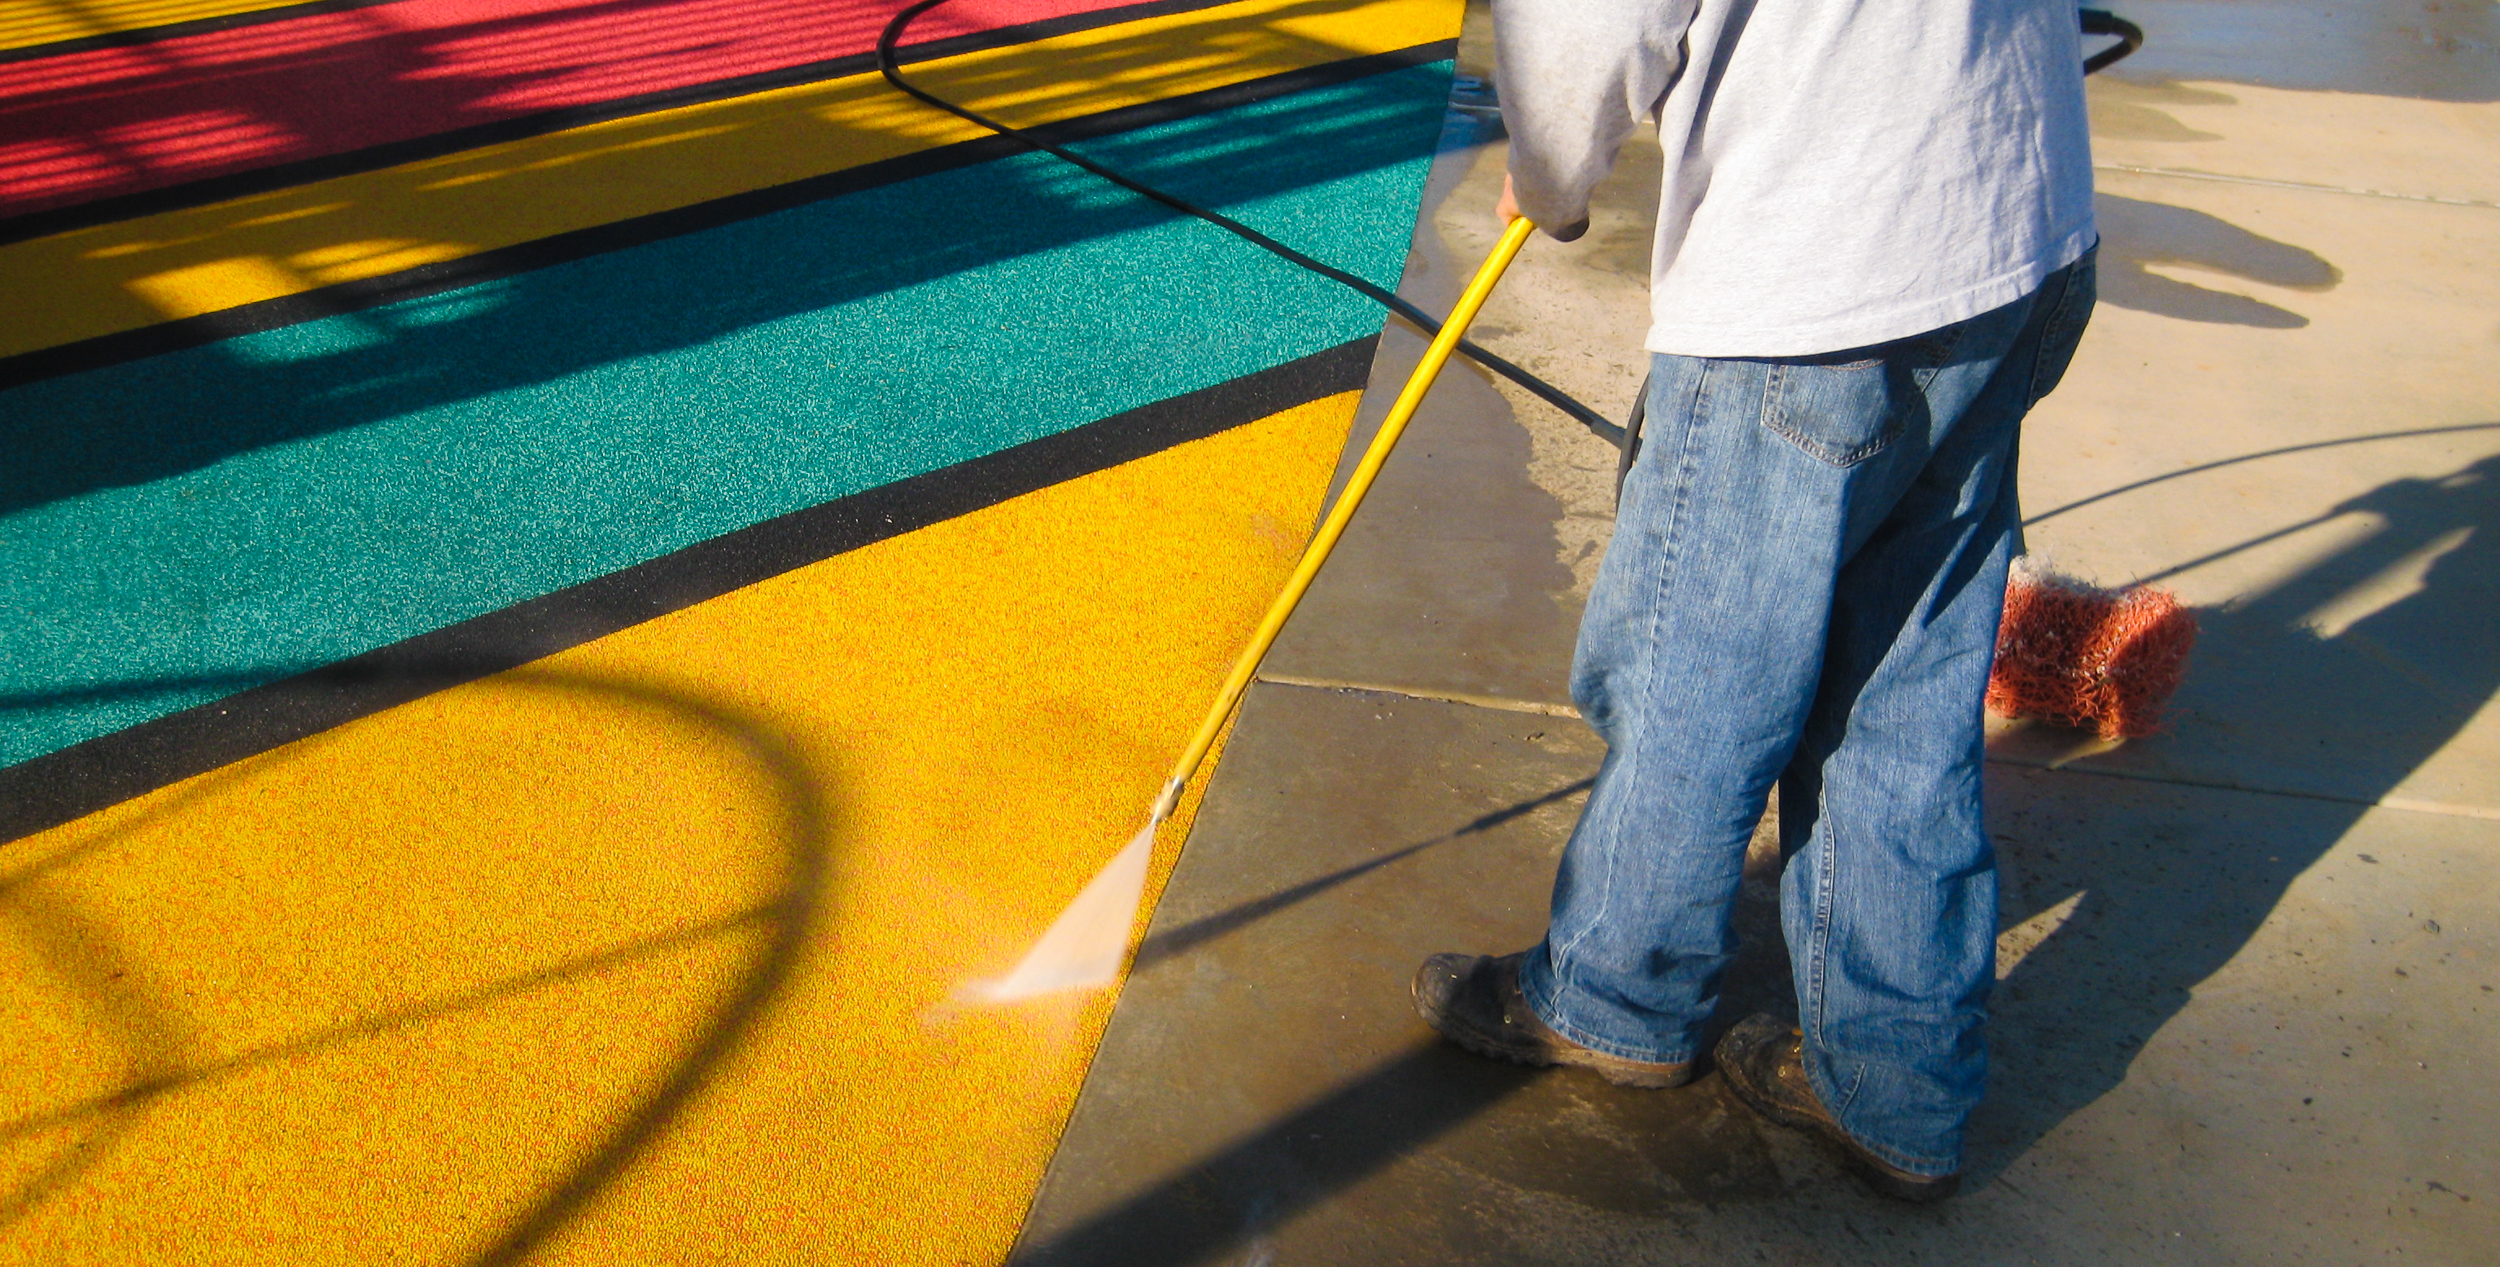 Safety surface removal services by AquaSeal Resurfacing, LLC